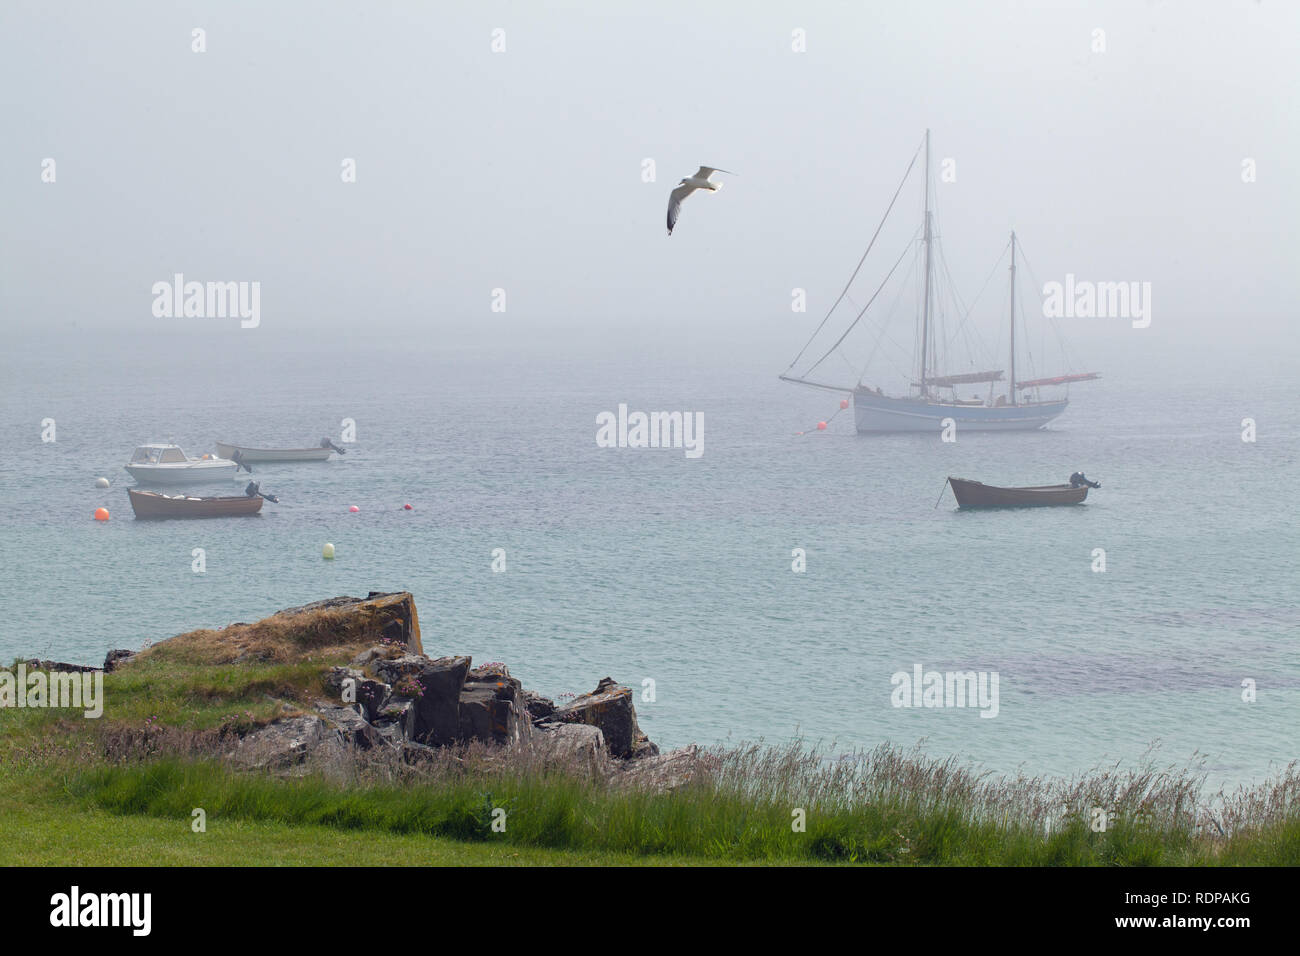 Anchored Boats.  View from The Village, St. Ronan’s Bay, Isle of Iona, across The Sound, towards Fionnphort, Mull, horizon obscured by early morning sea mist. The Inner Hebrides. South West Scotland. UK Stock Photo